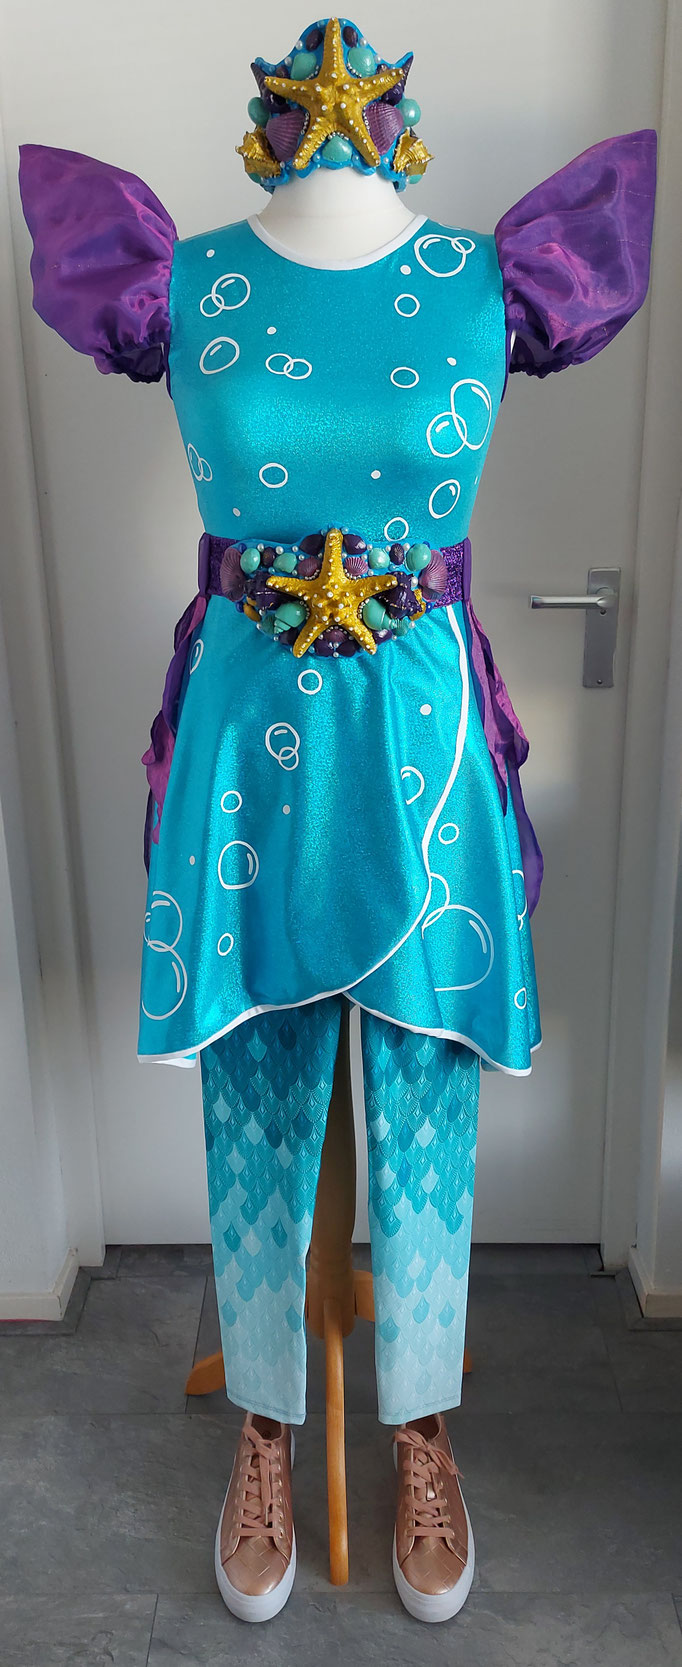 Sea princess costume designed and made for 'Van 't Ende Producties'.